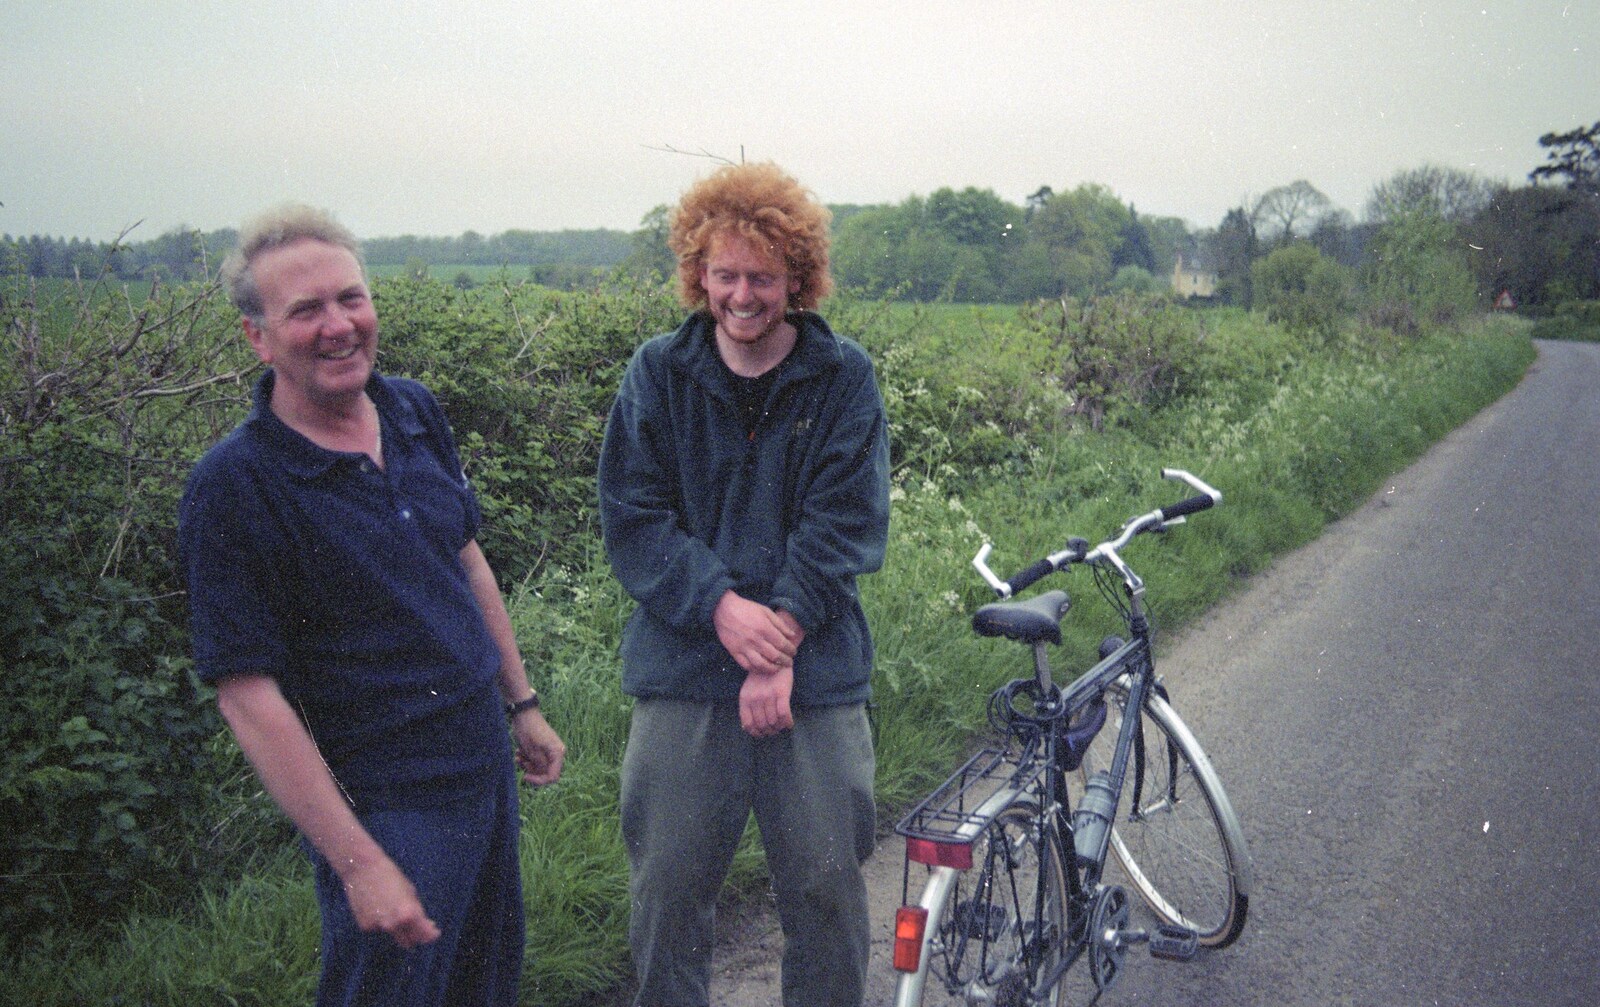 John Willy and Wavy from A BSCC Bike Ride, Brockdish Greyhound and Hoxne Swan, Suffolk - 4th May 2000